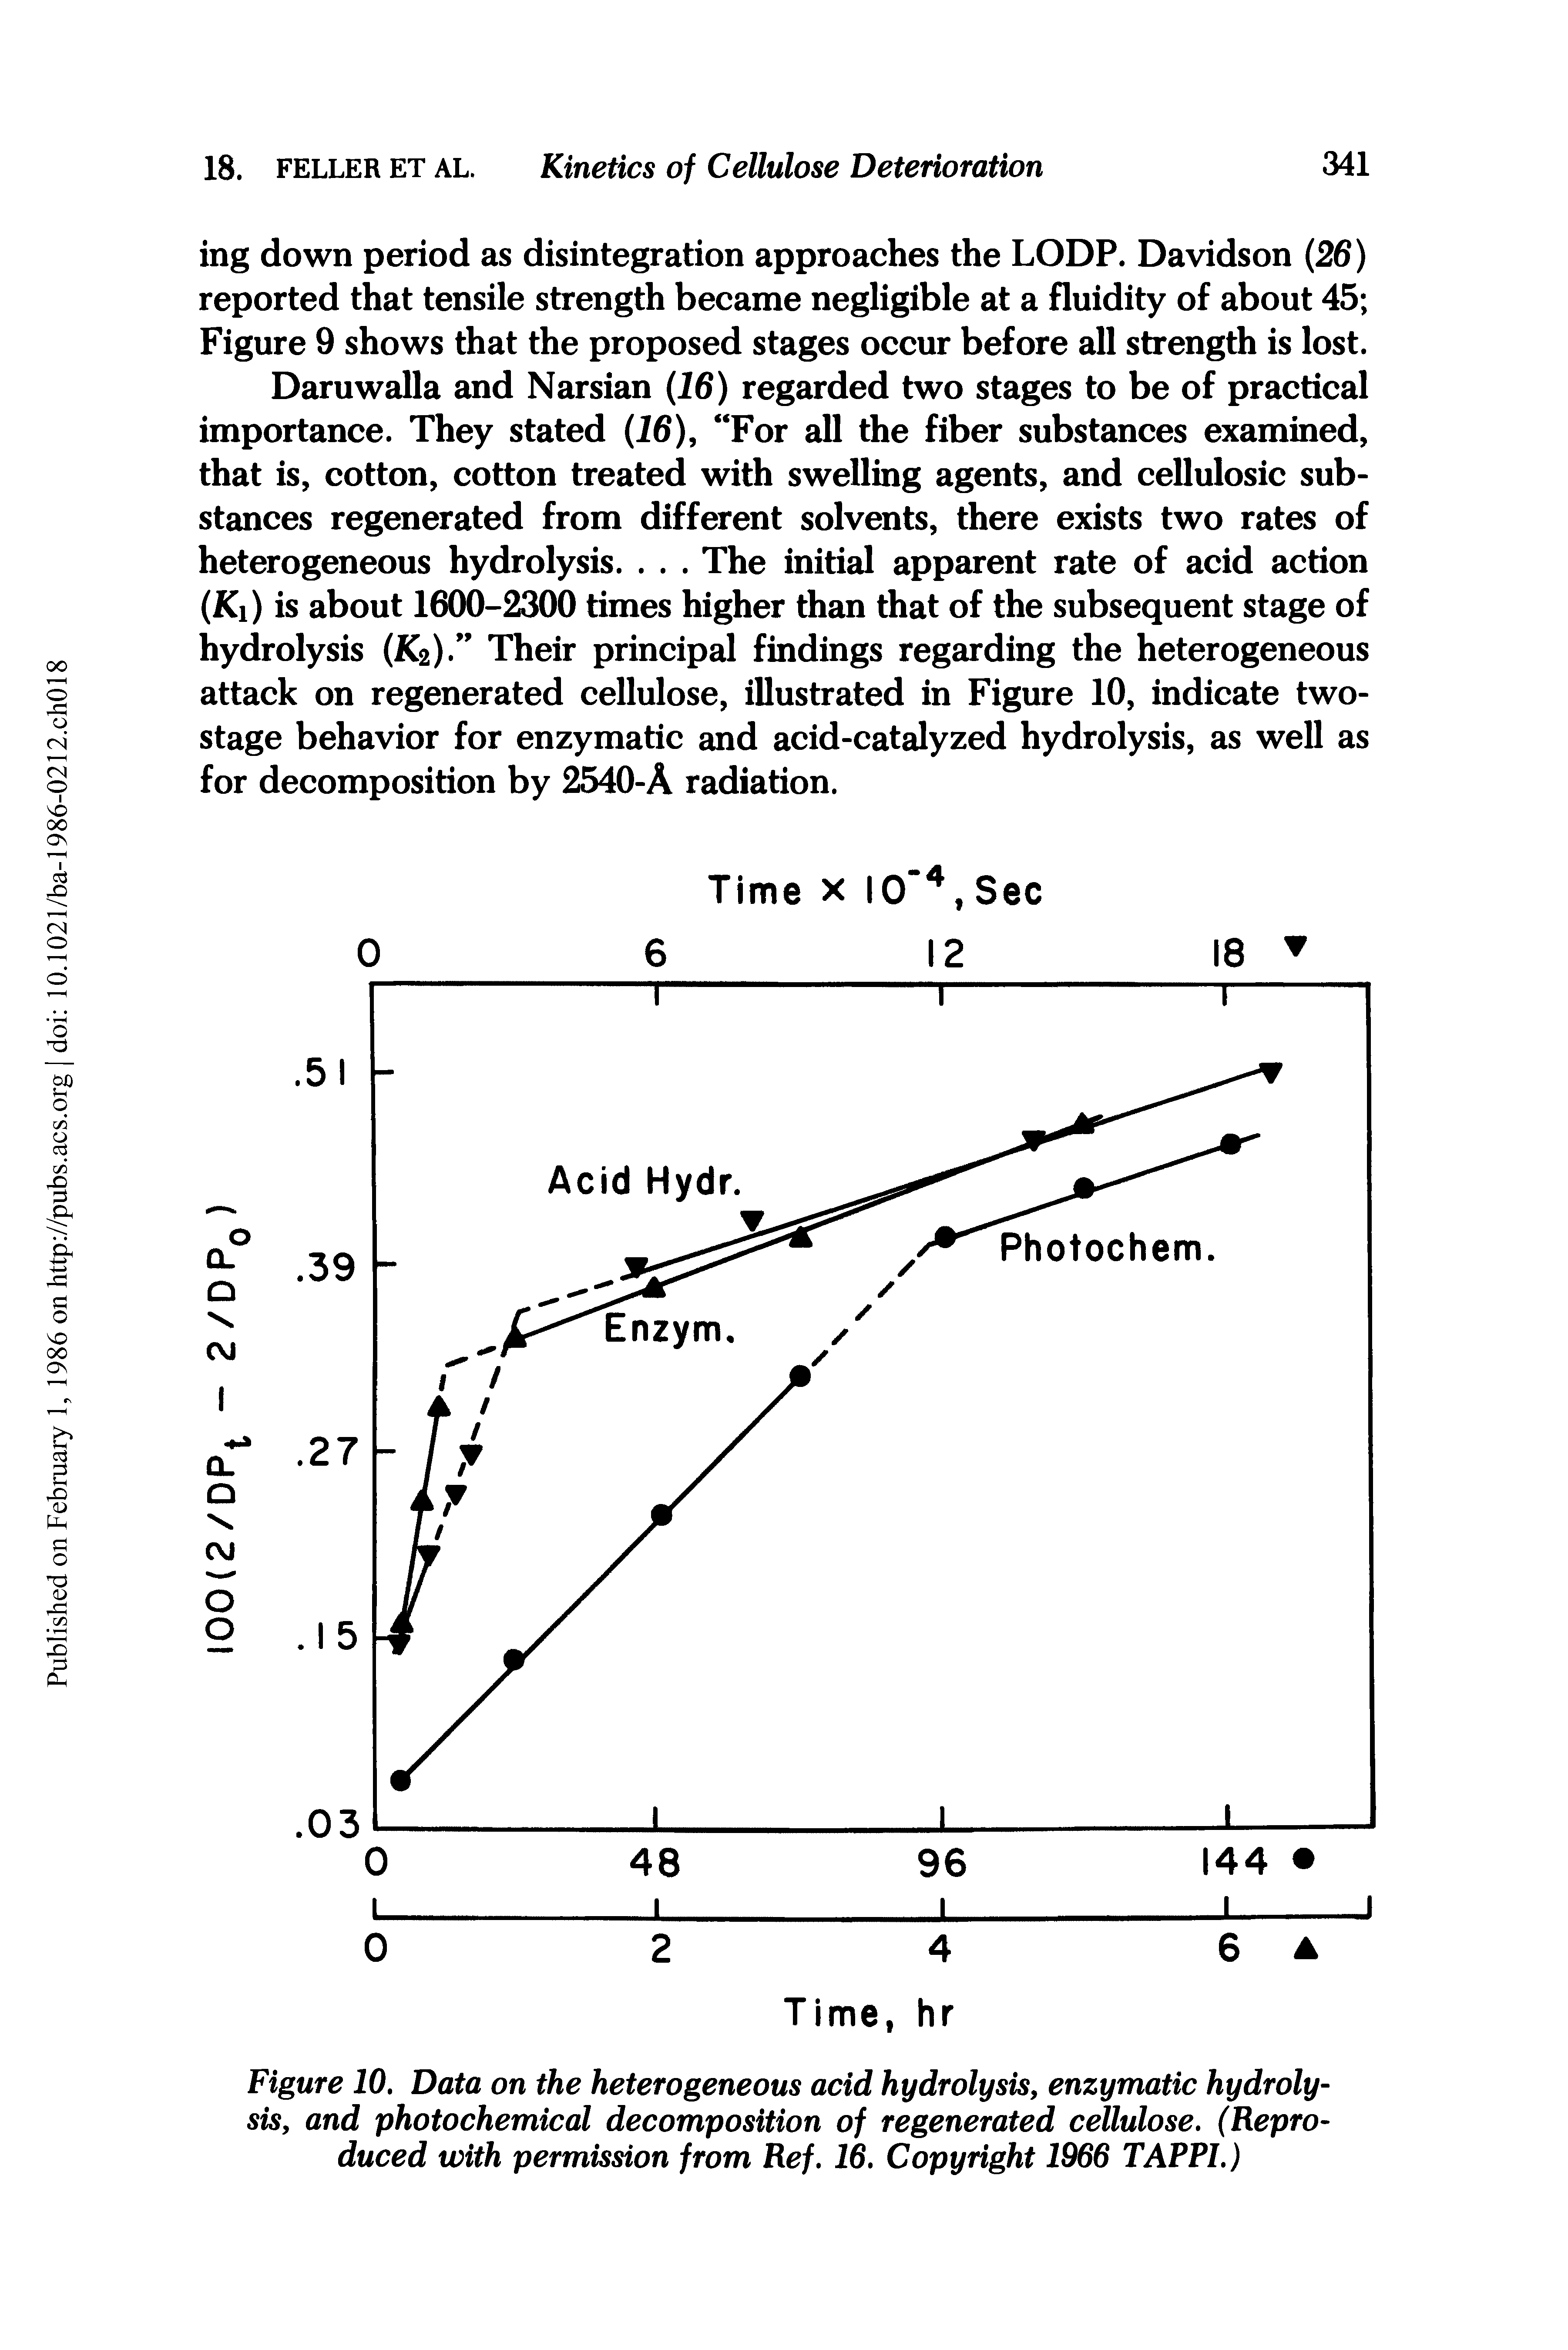 Figure 10. Data on the heterogeneous acid hydrolysis, enzymatic hydrolysis, and photochemical decomposition of regenerated cellulose. (Reproduced with permission from Ref. 16. Copyright 1966 TAPPI.)...